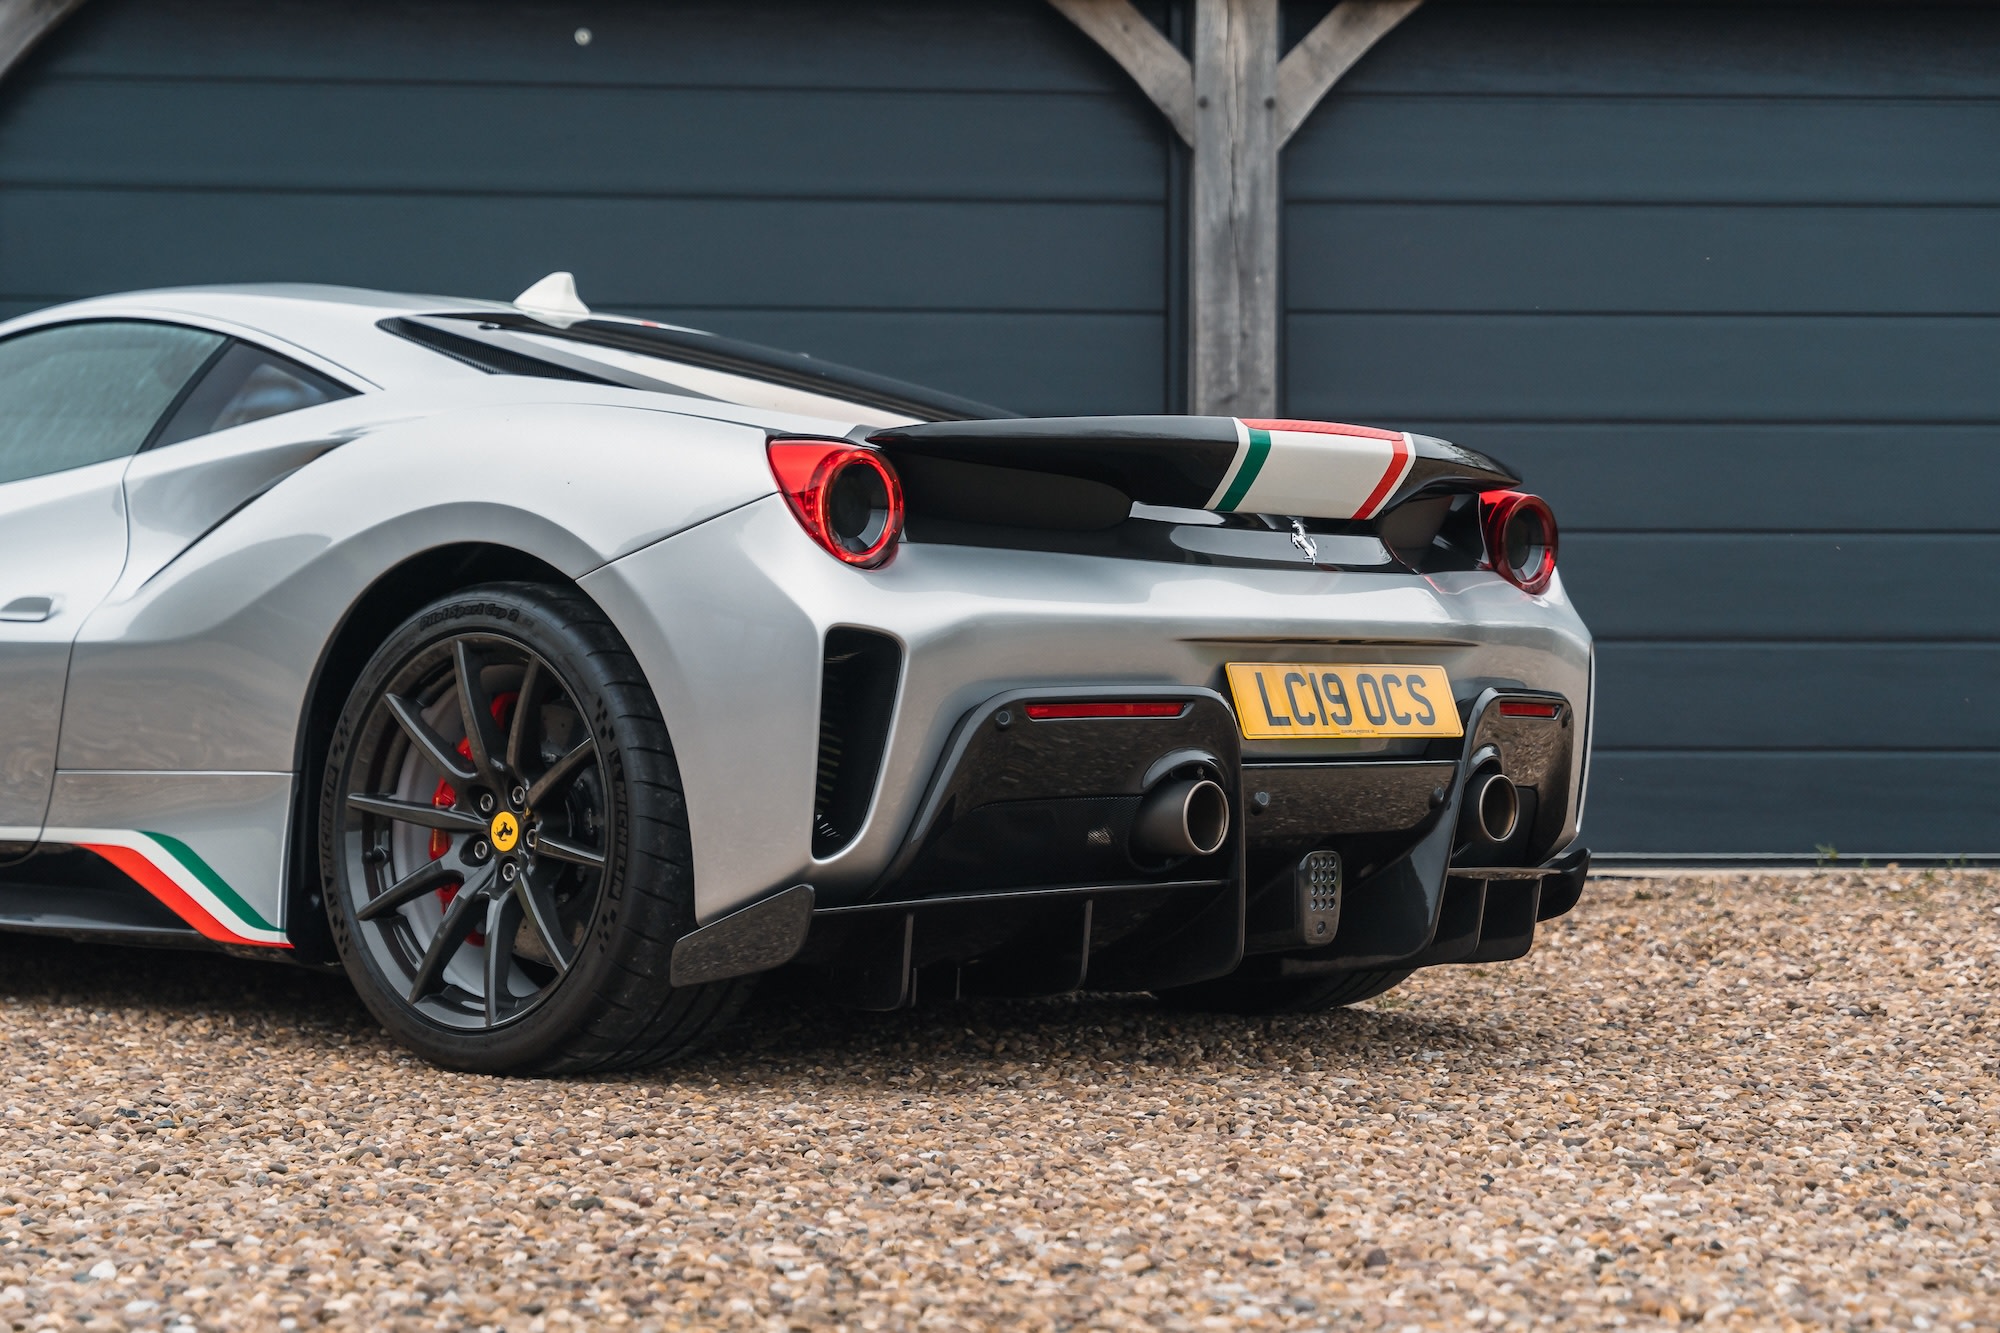 This Ferrari 488 Pista Piloti is a striking limited-edition track-focused modern supercar, with little more than delivery mileage on the odometer. 1